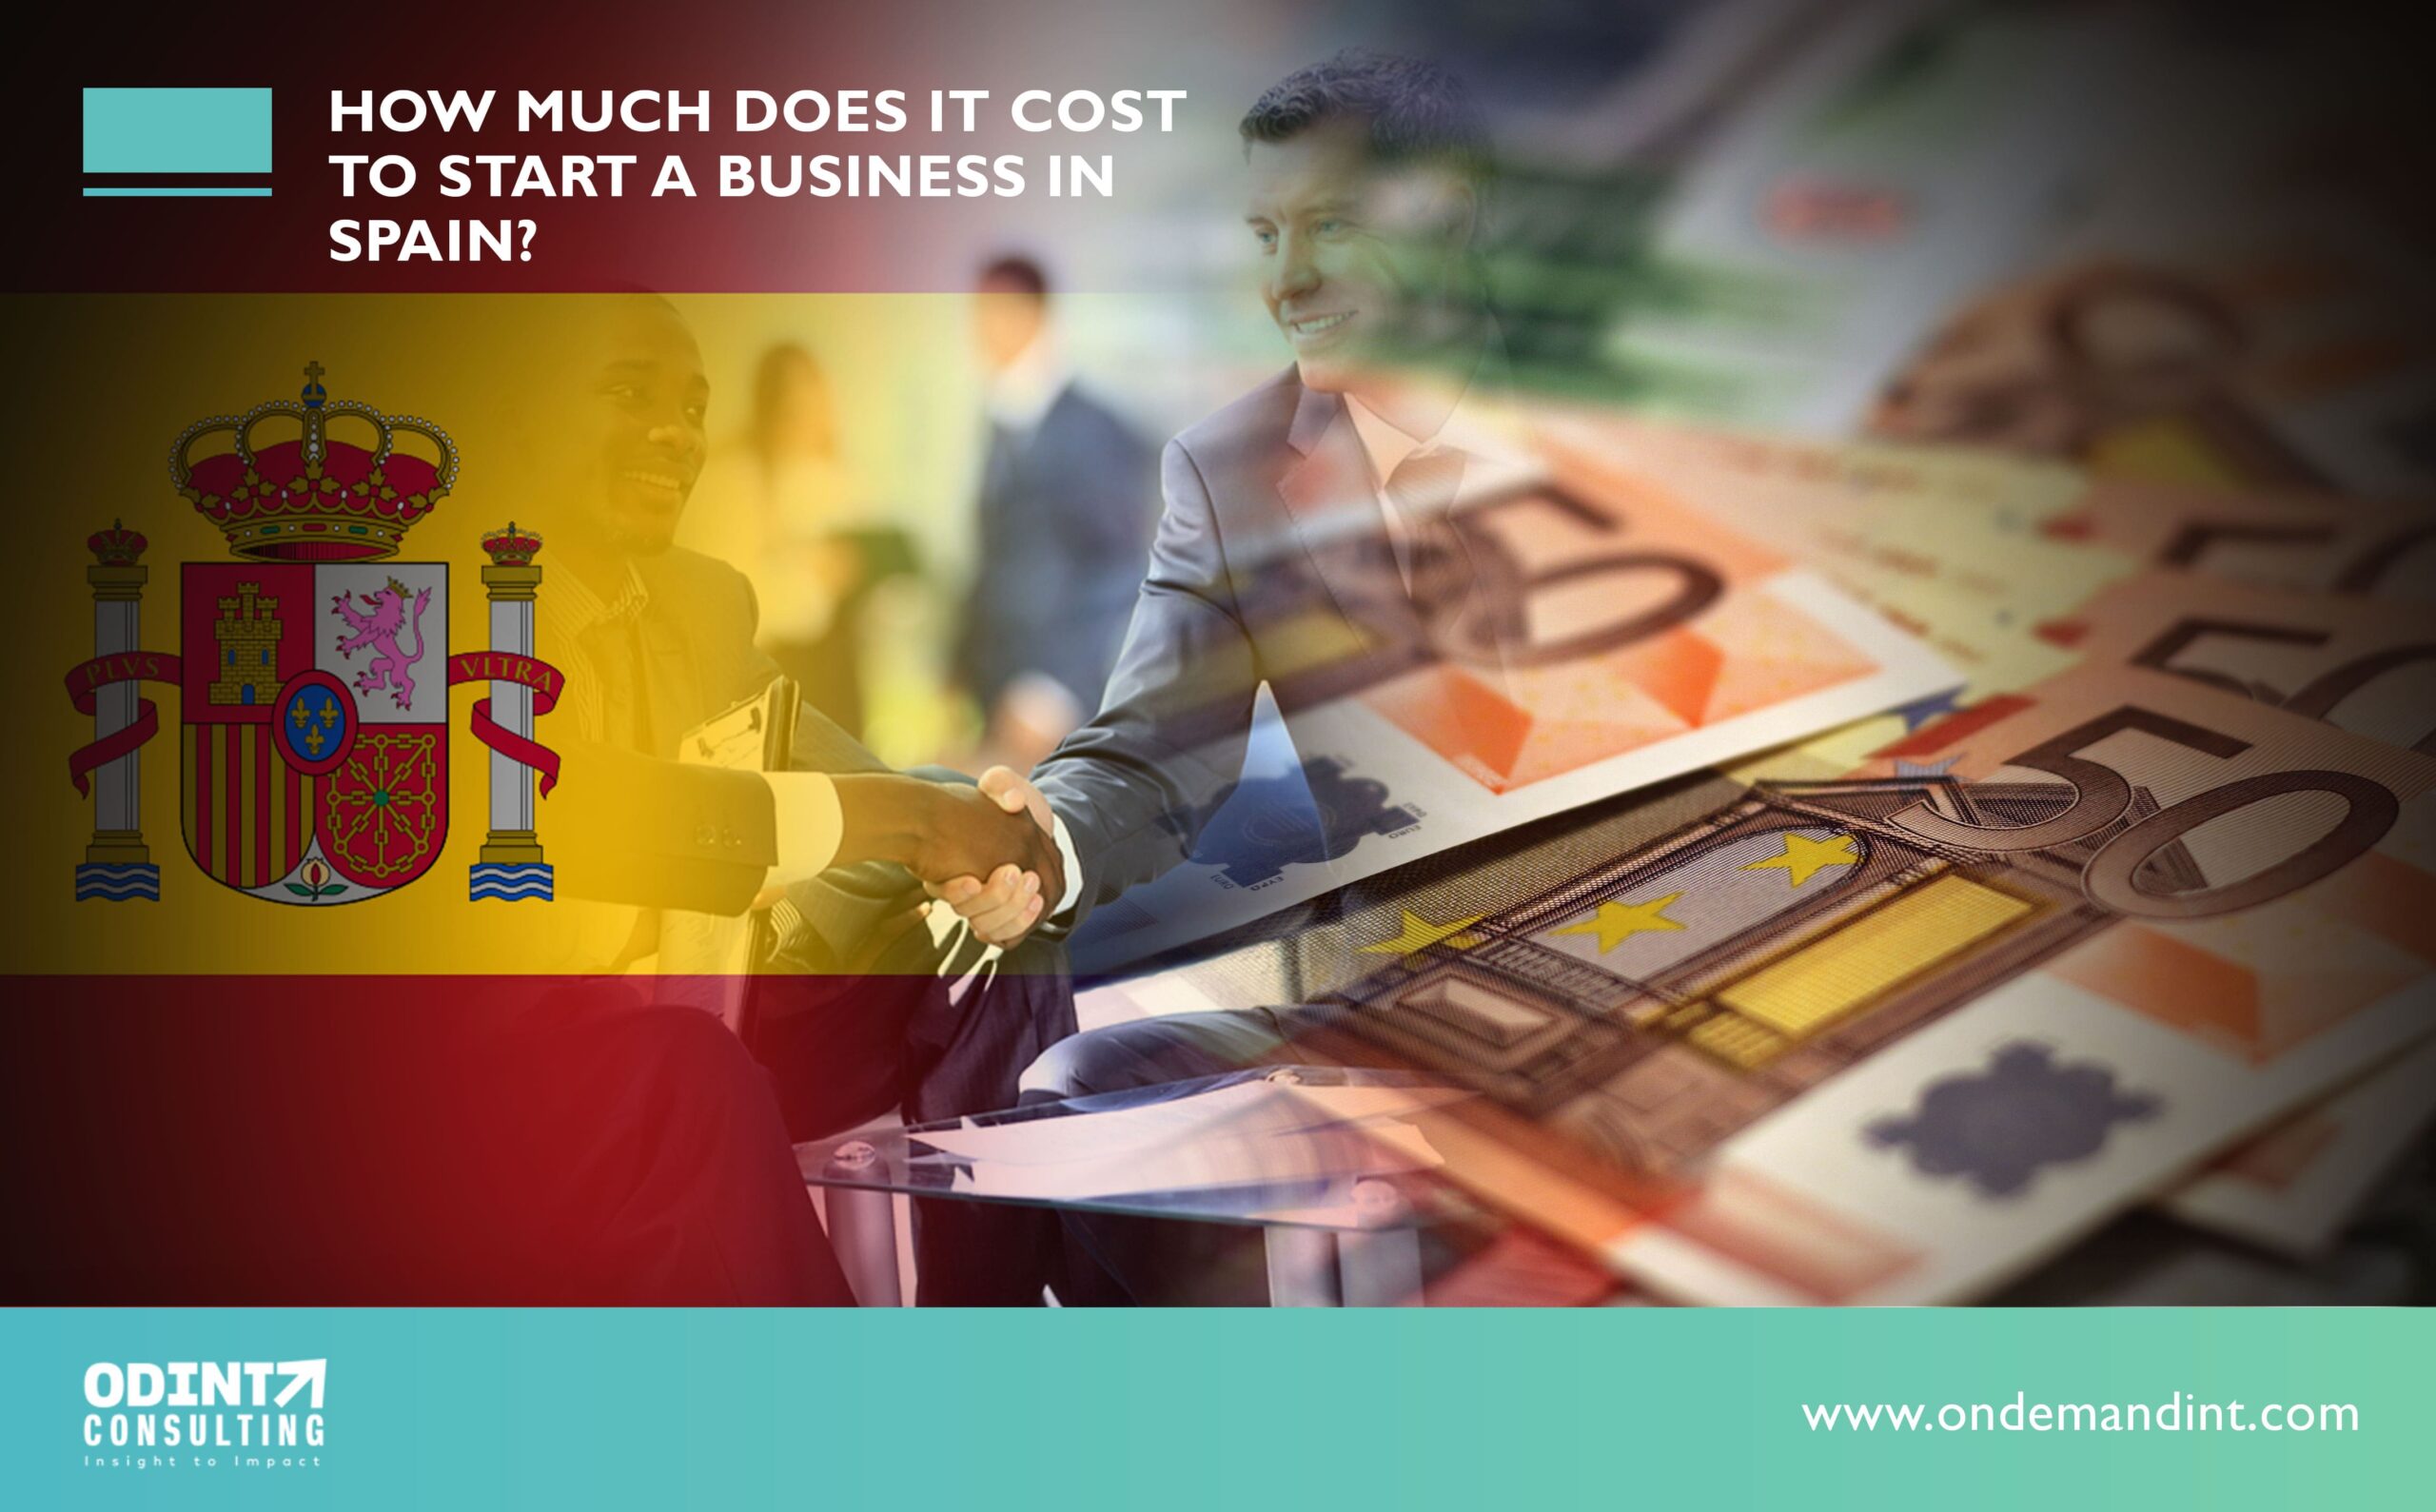 How Much Does It Cost to Start a Business in Spain?